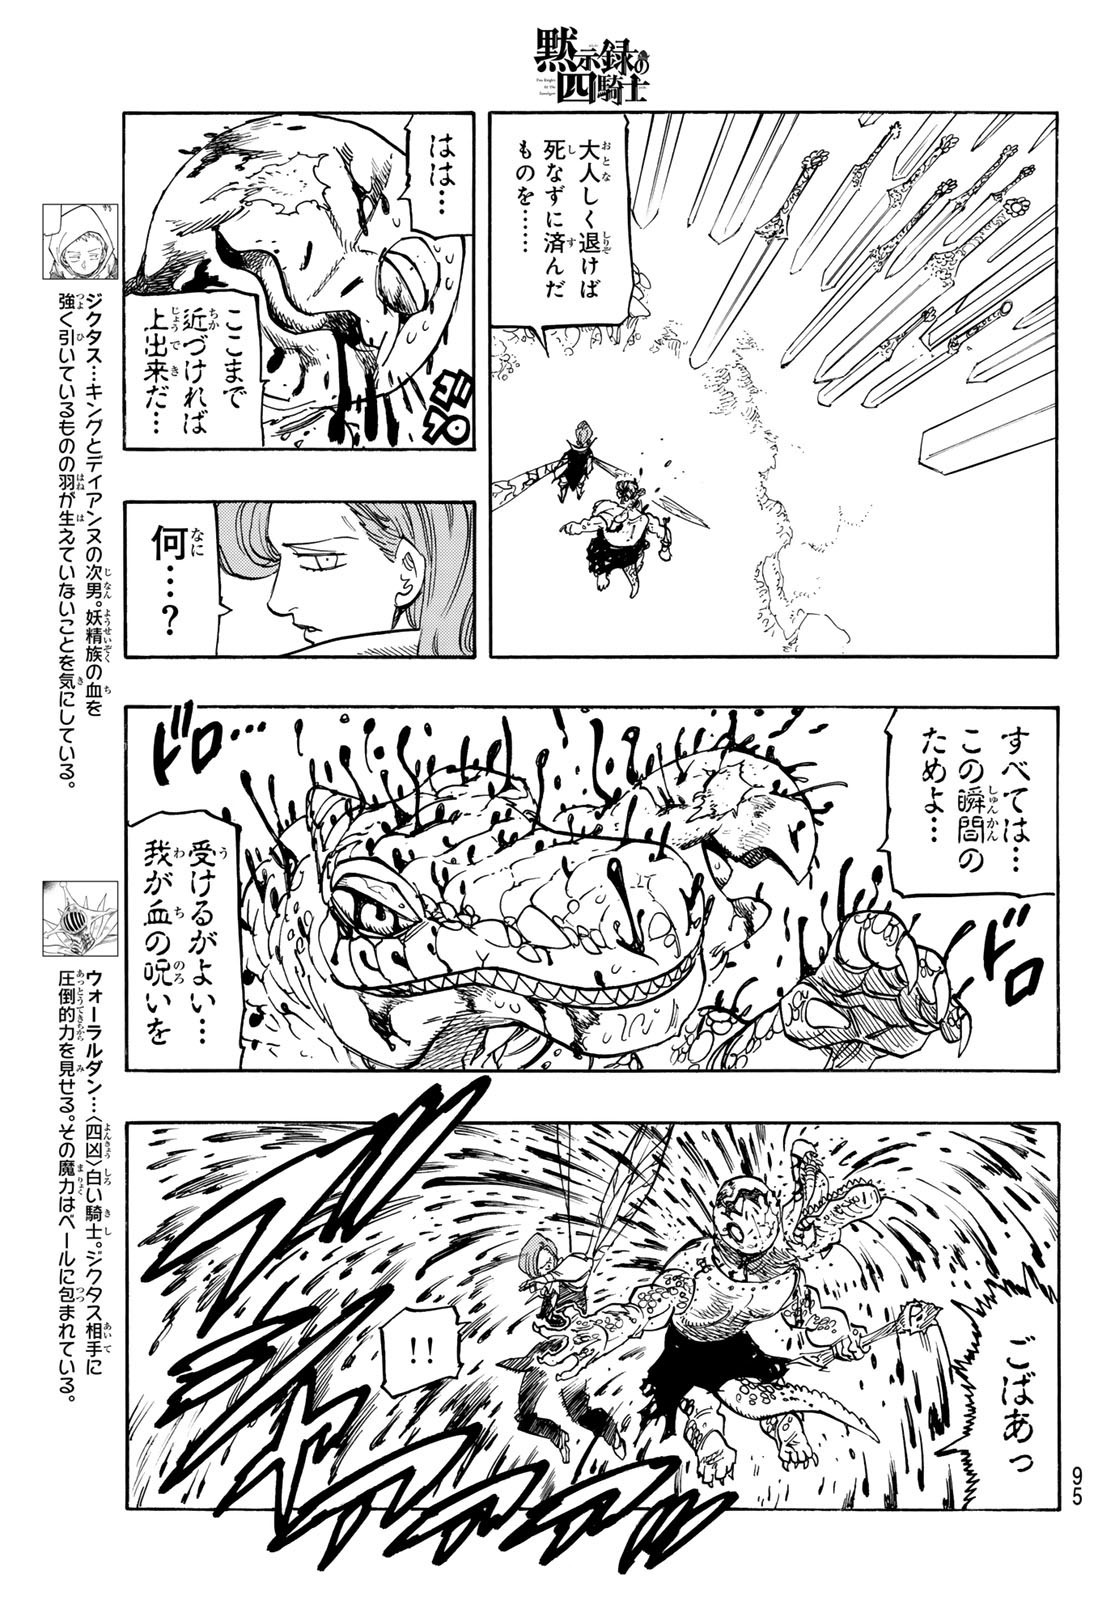 Weekly Shōnen Magazine - 週刊少年マガジン - Chapter 2024-23 - Page 93